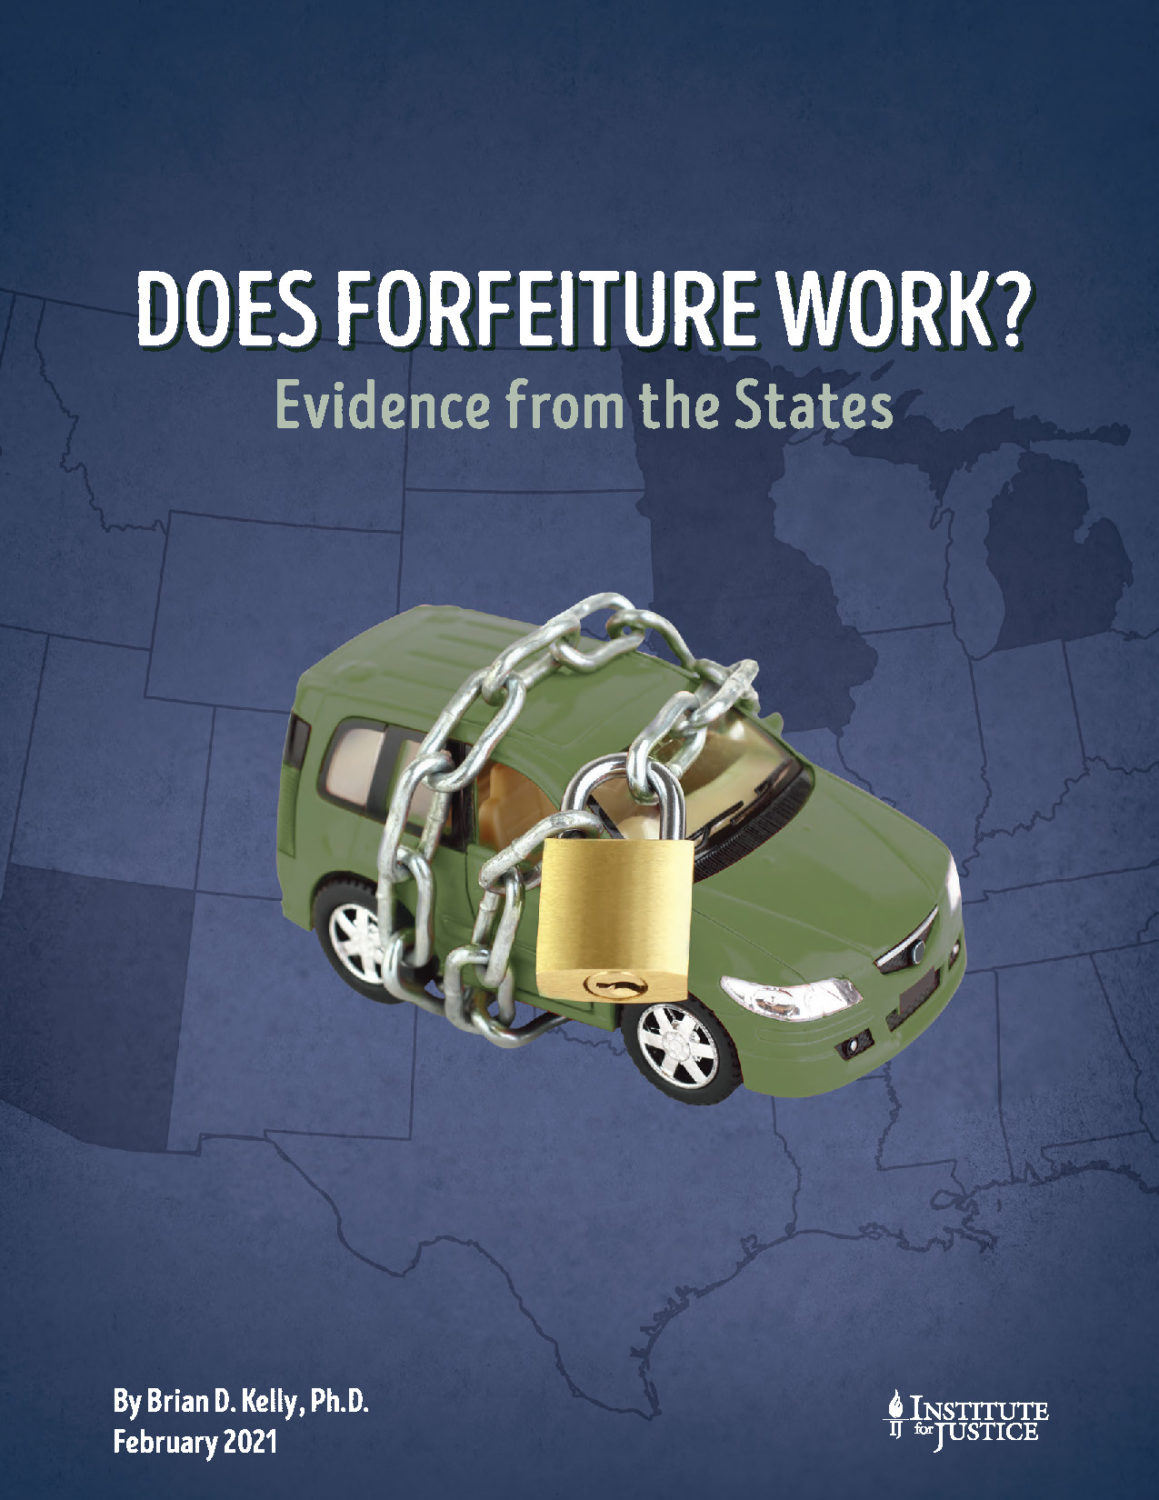 Does Forfeiture Work?